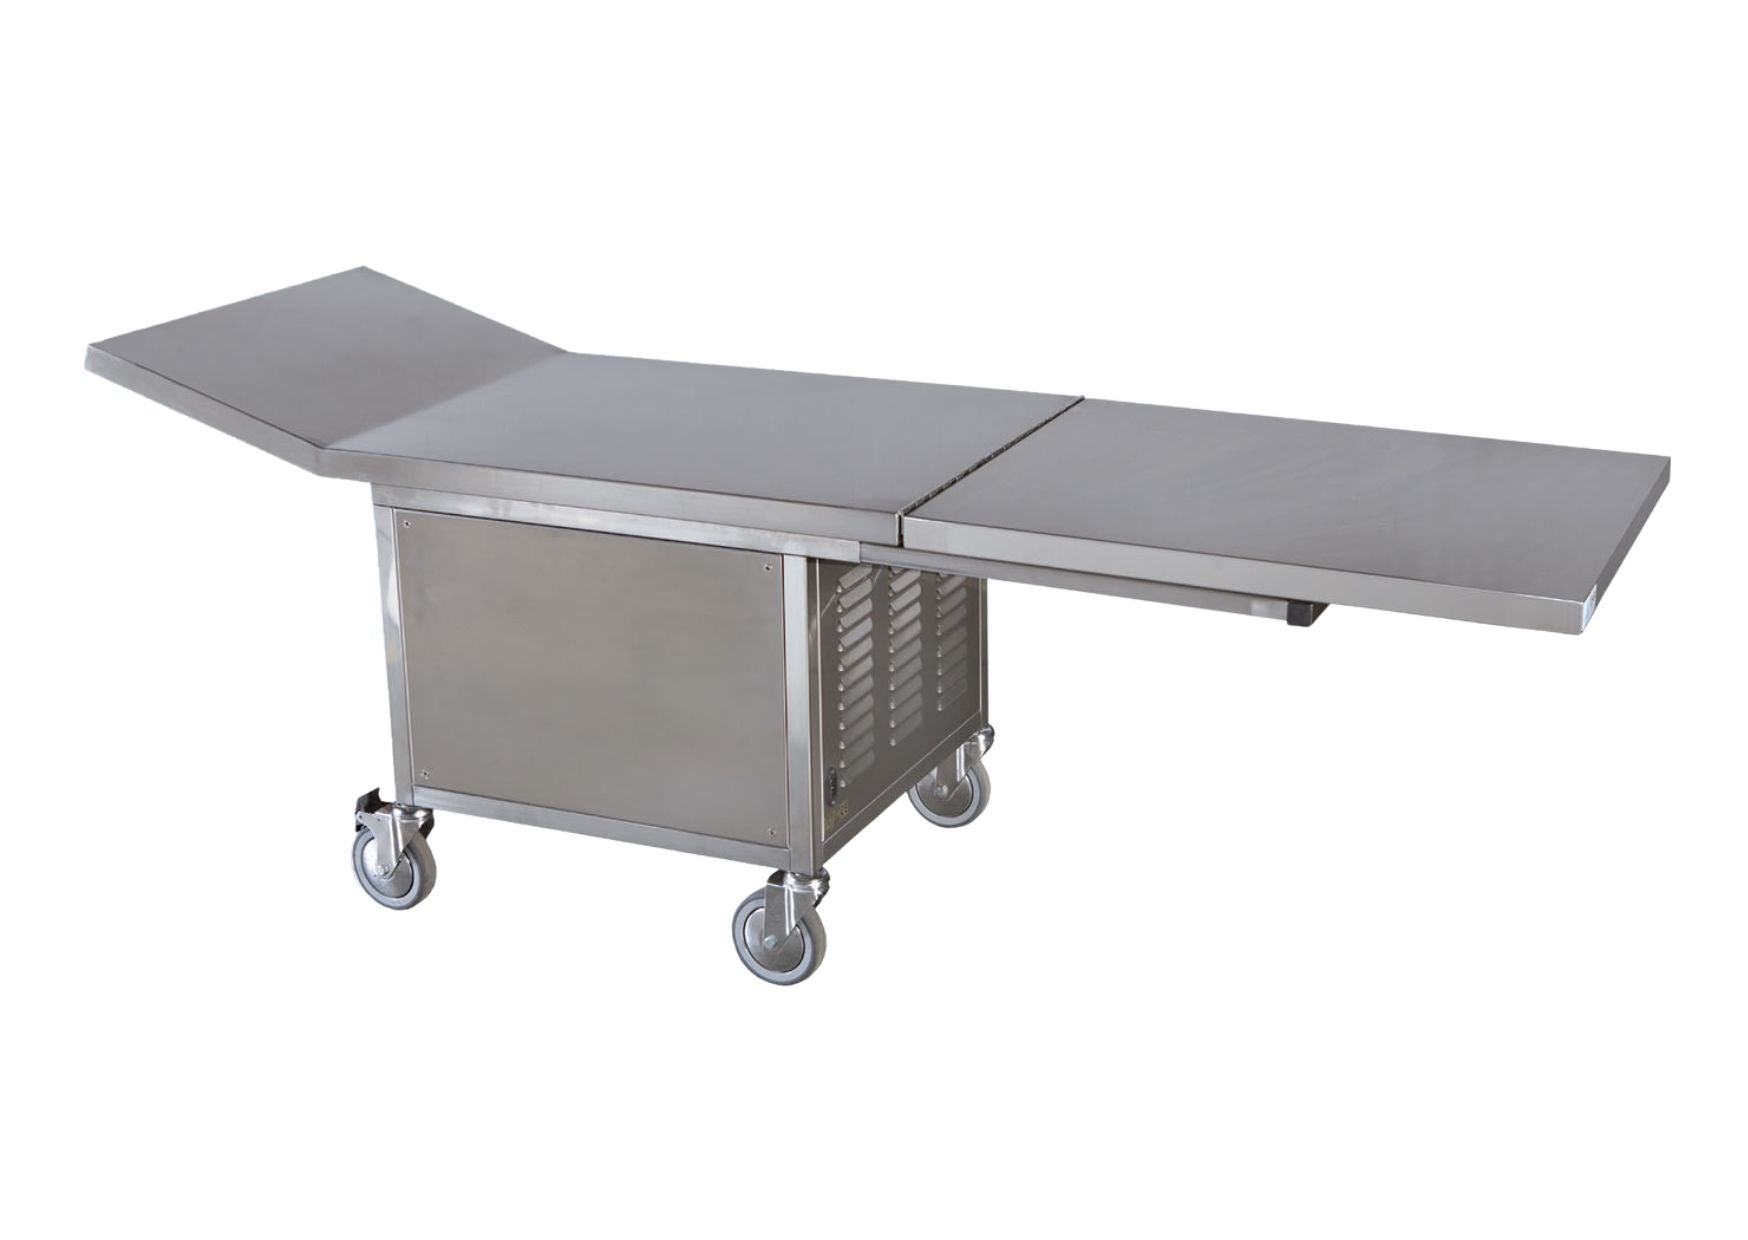 Stainless steel storage table with cooling